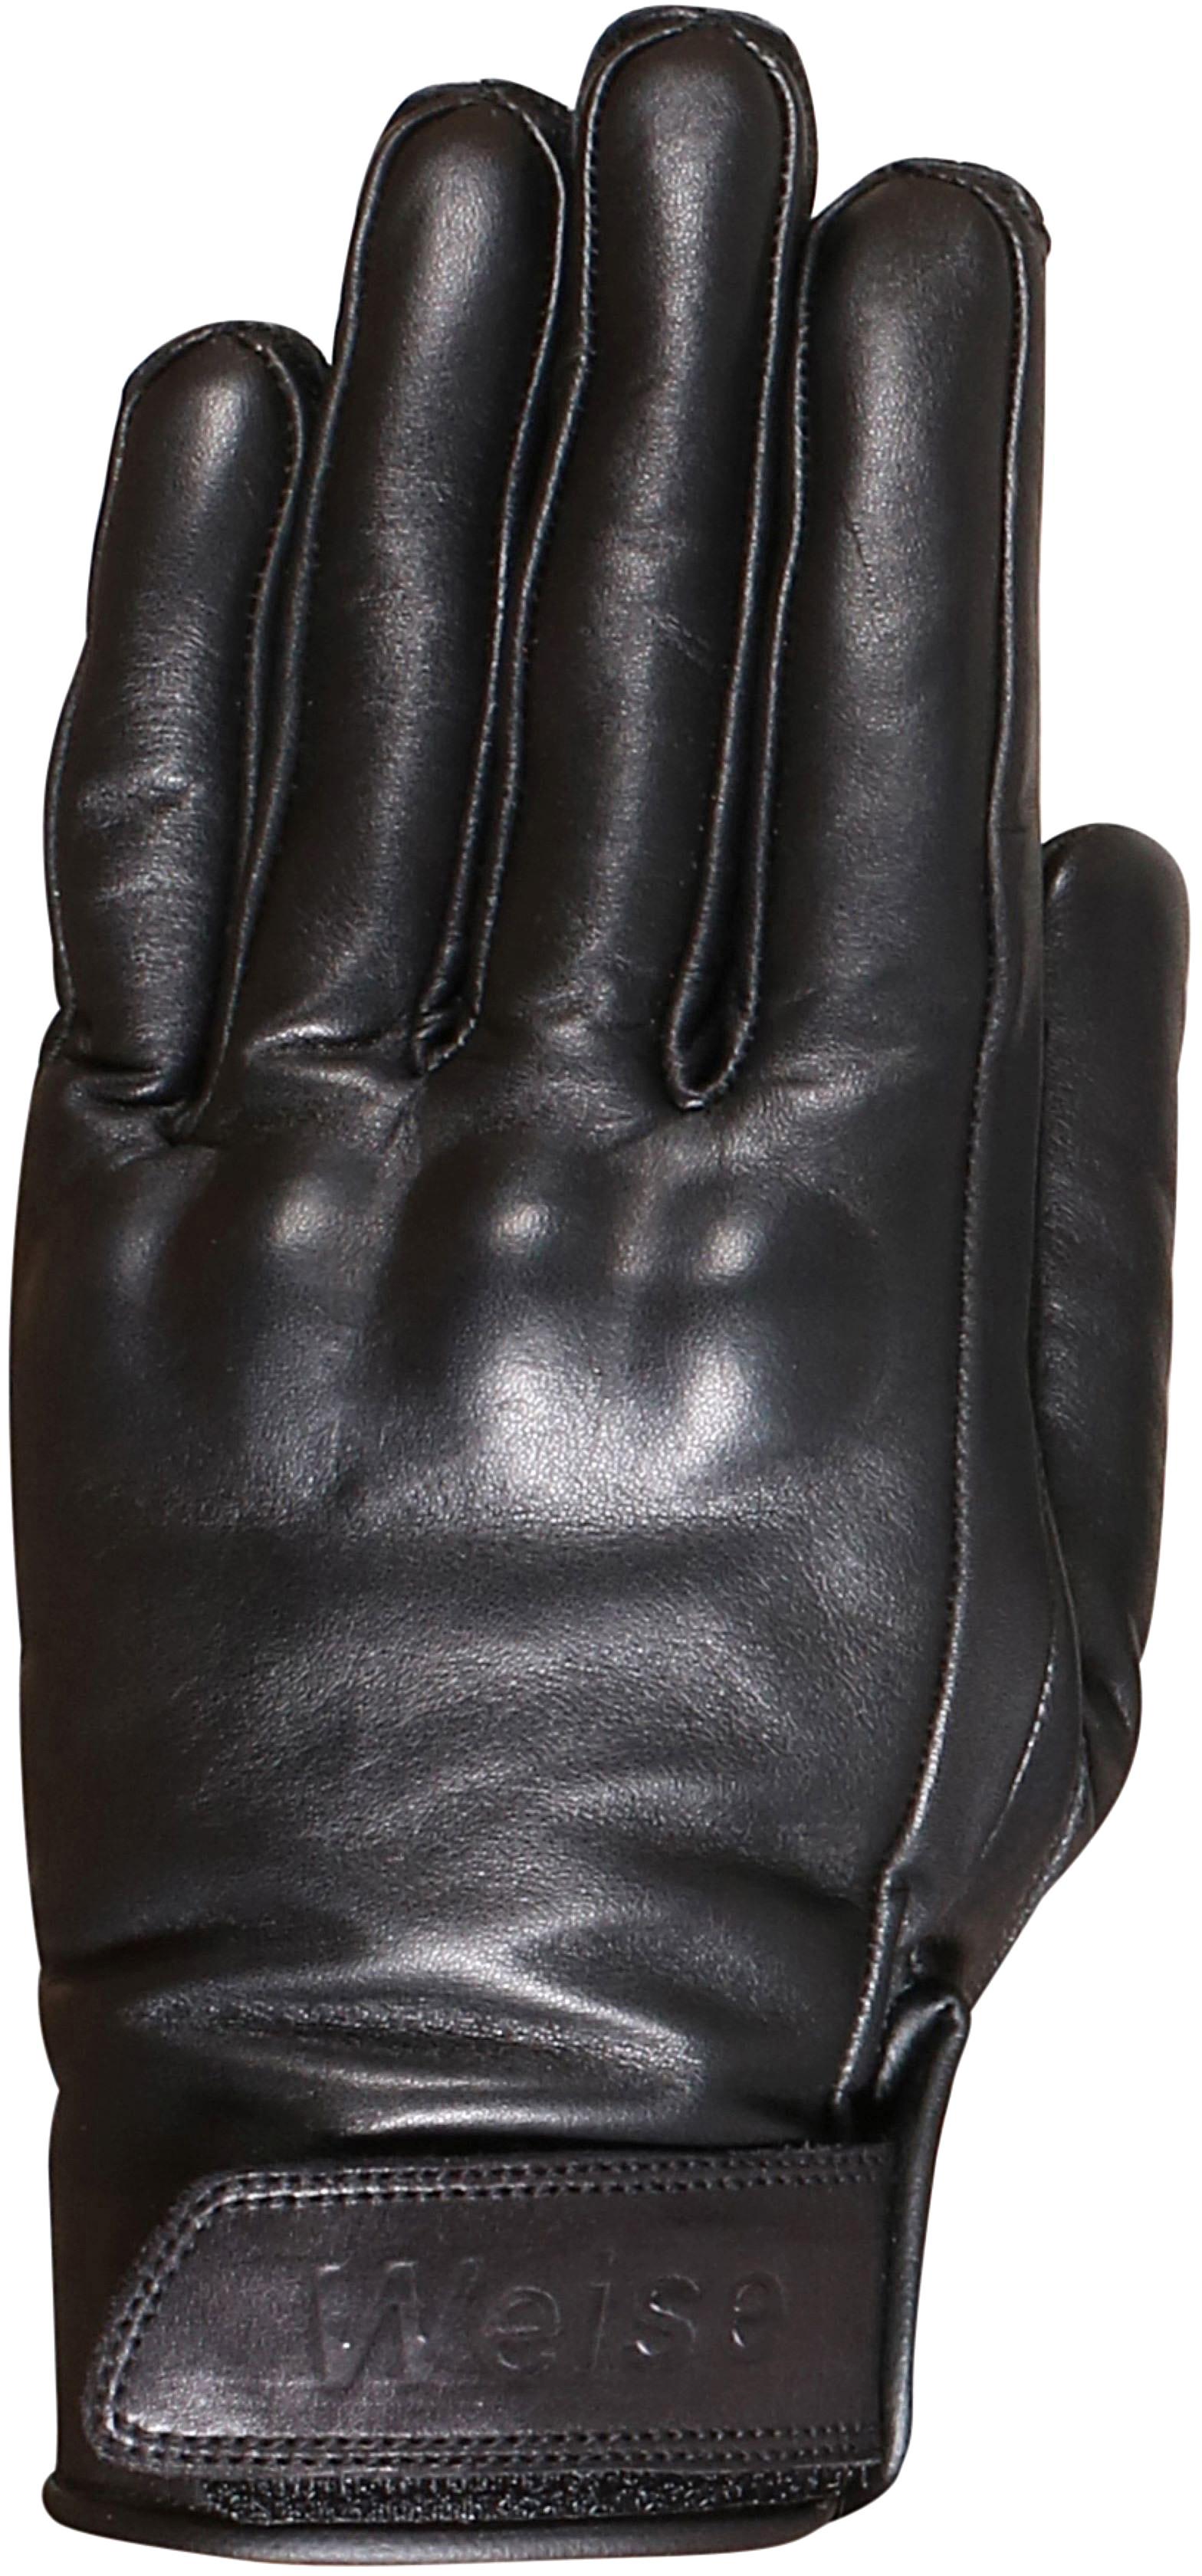 Weise Tilly Womens Motorcycle Gloves - Black, S